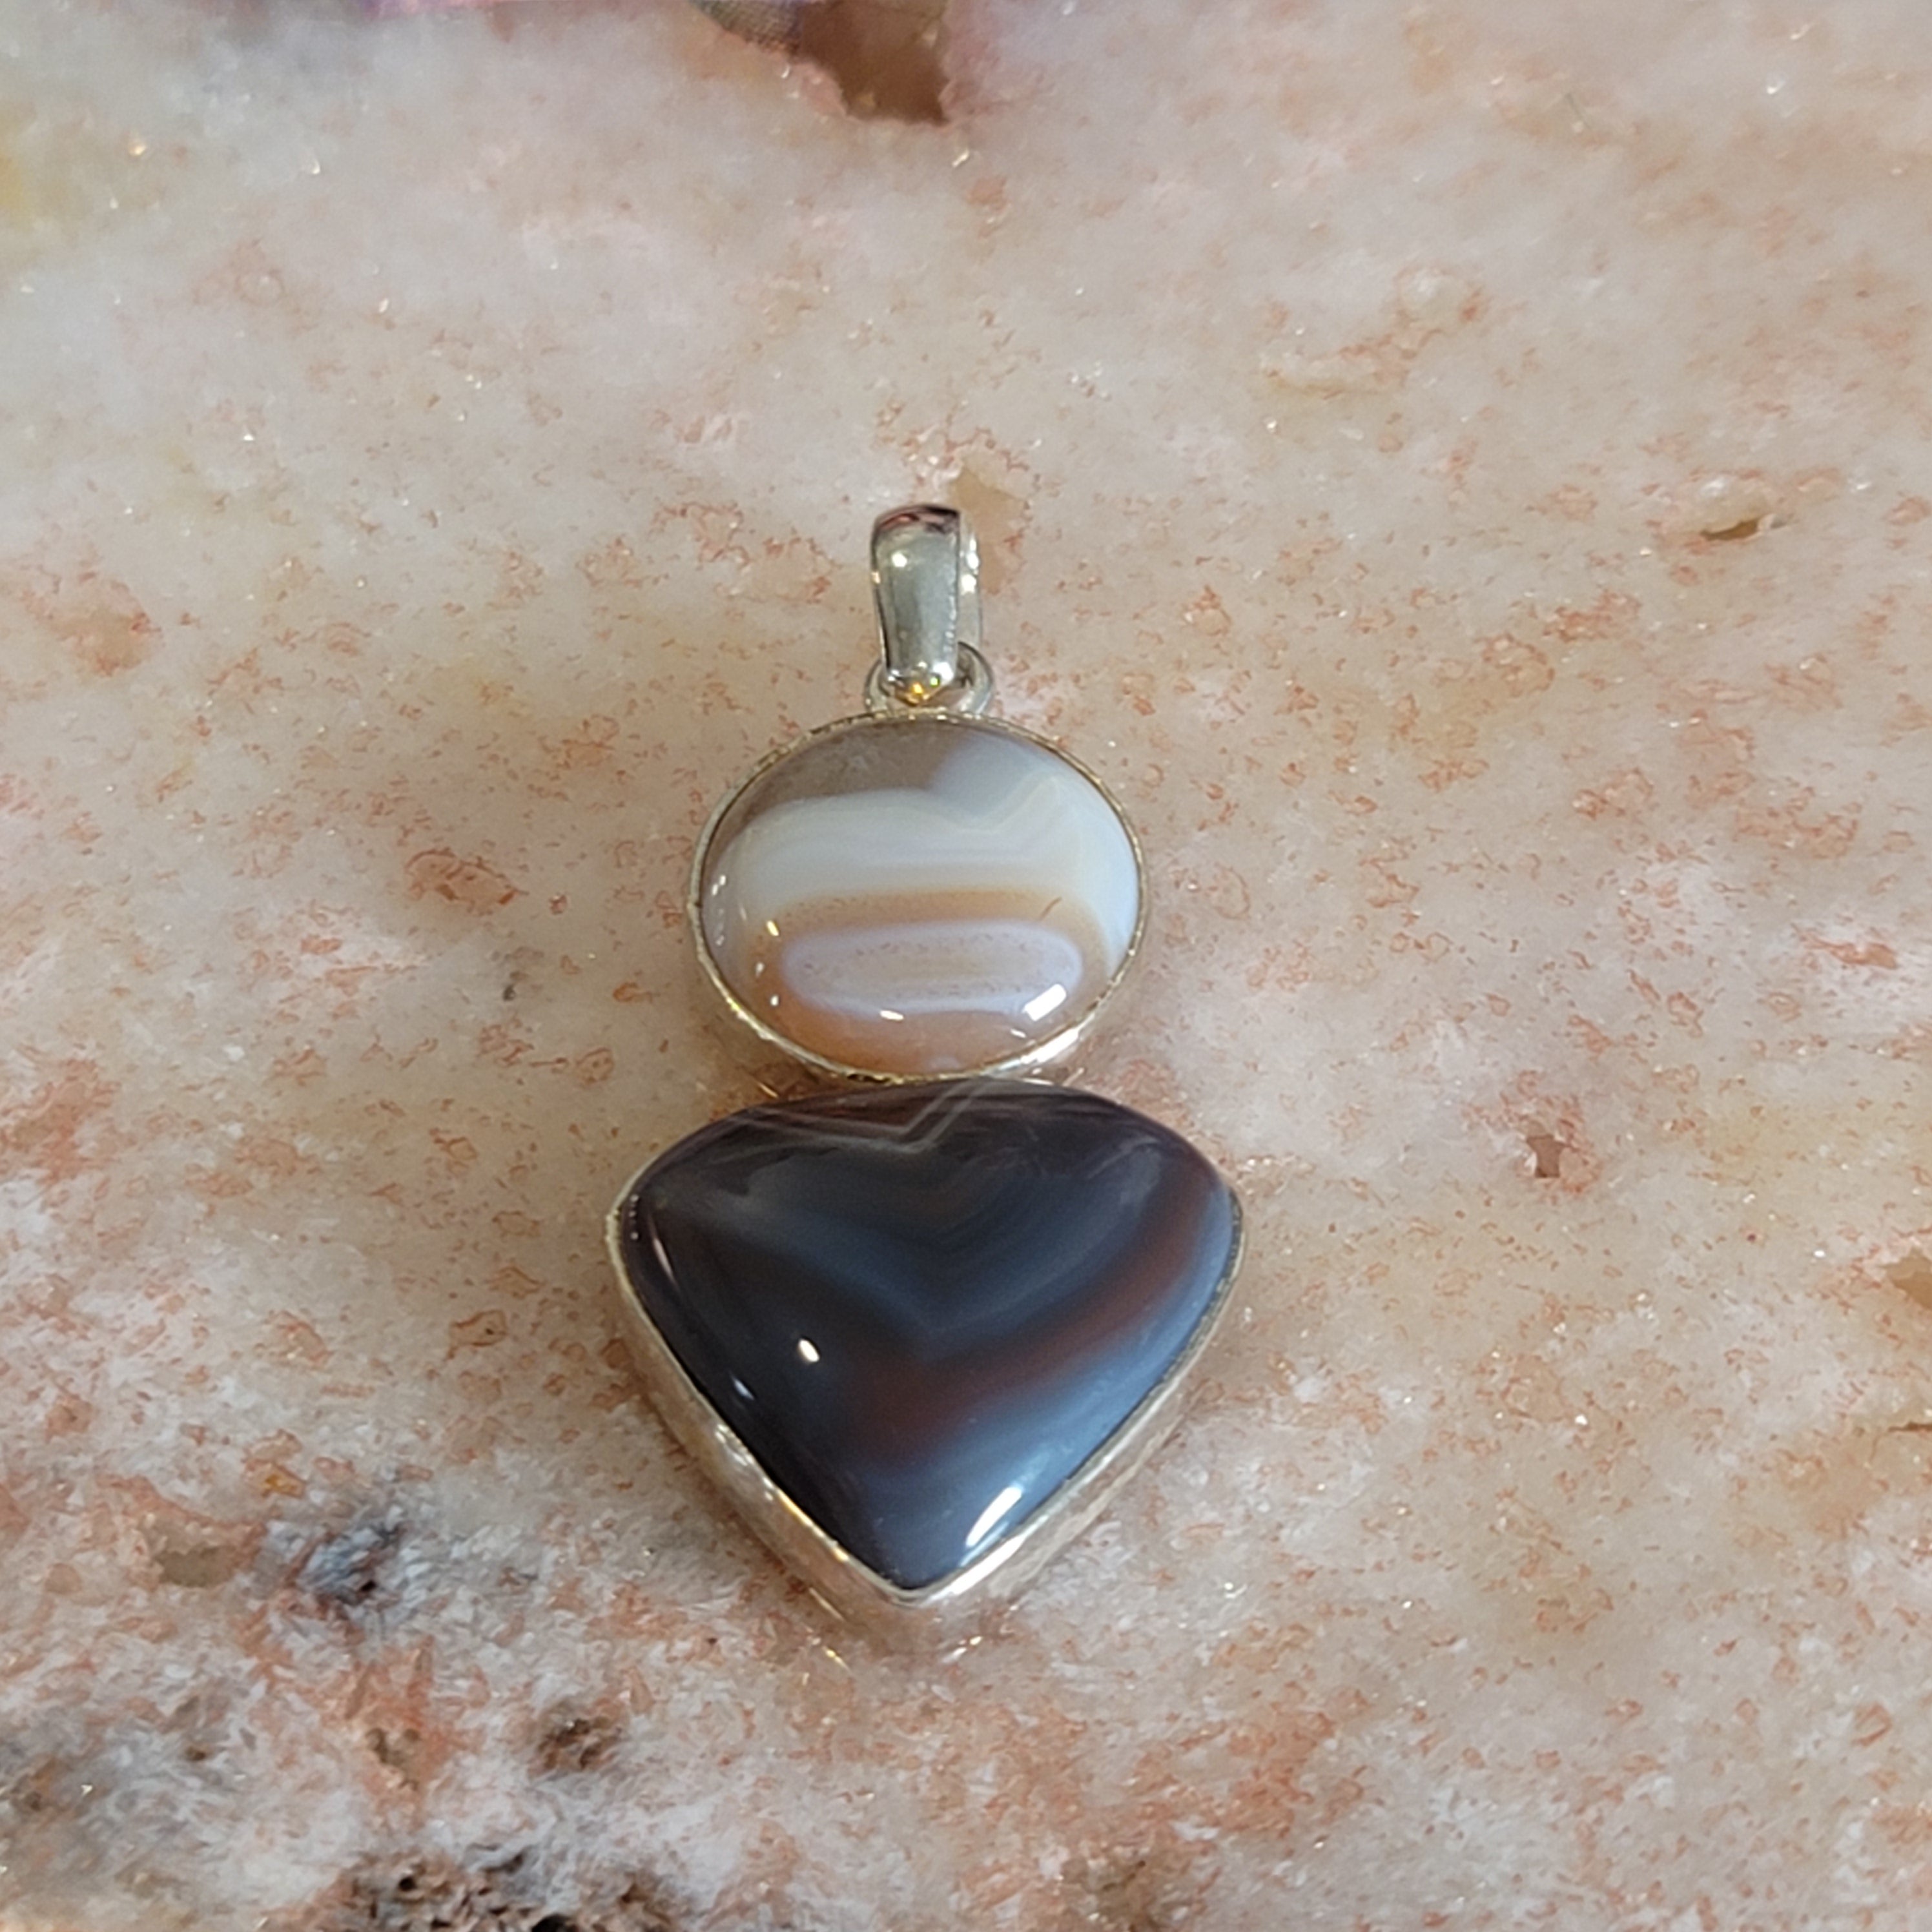 Botswana Agate Pendant .925 Silver for Hope, Protection and Strength